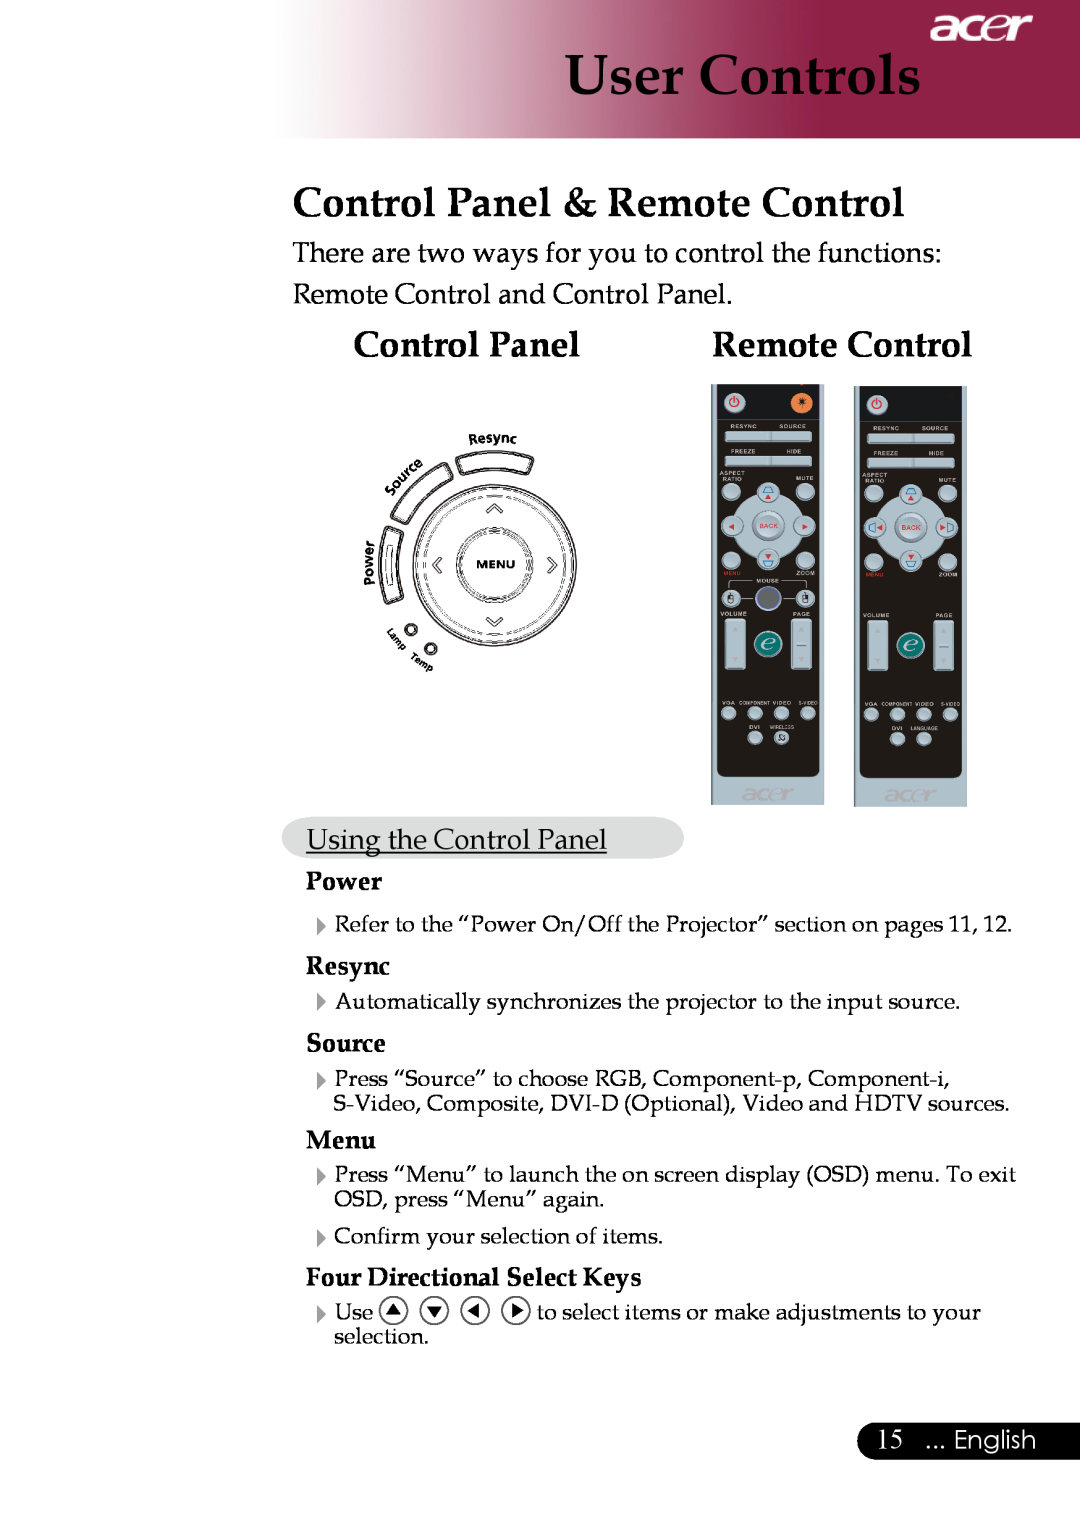 Acer XD1170 User Controls, Control Panel & Remote Control, Using the Control Panel, Power, Resync, Source, Menu, English 